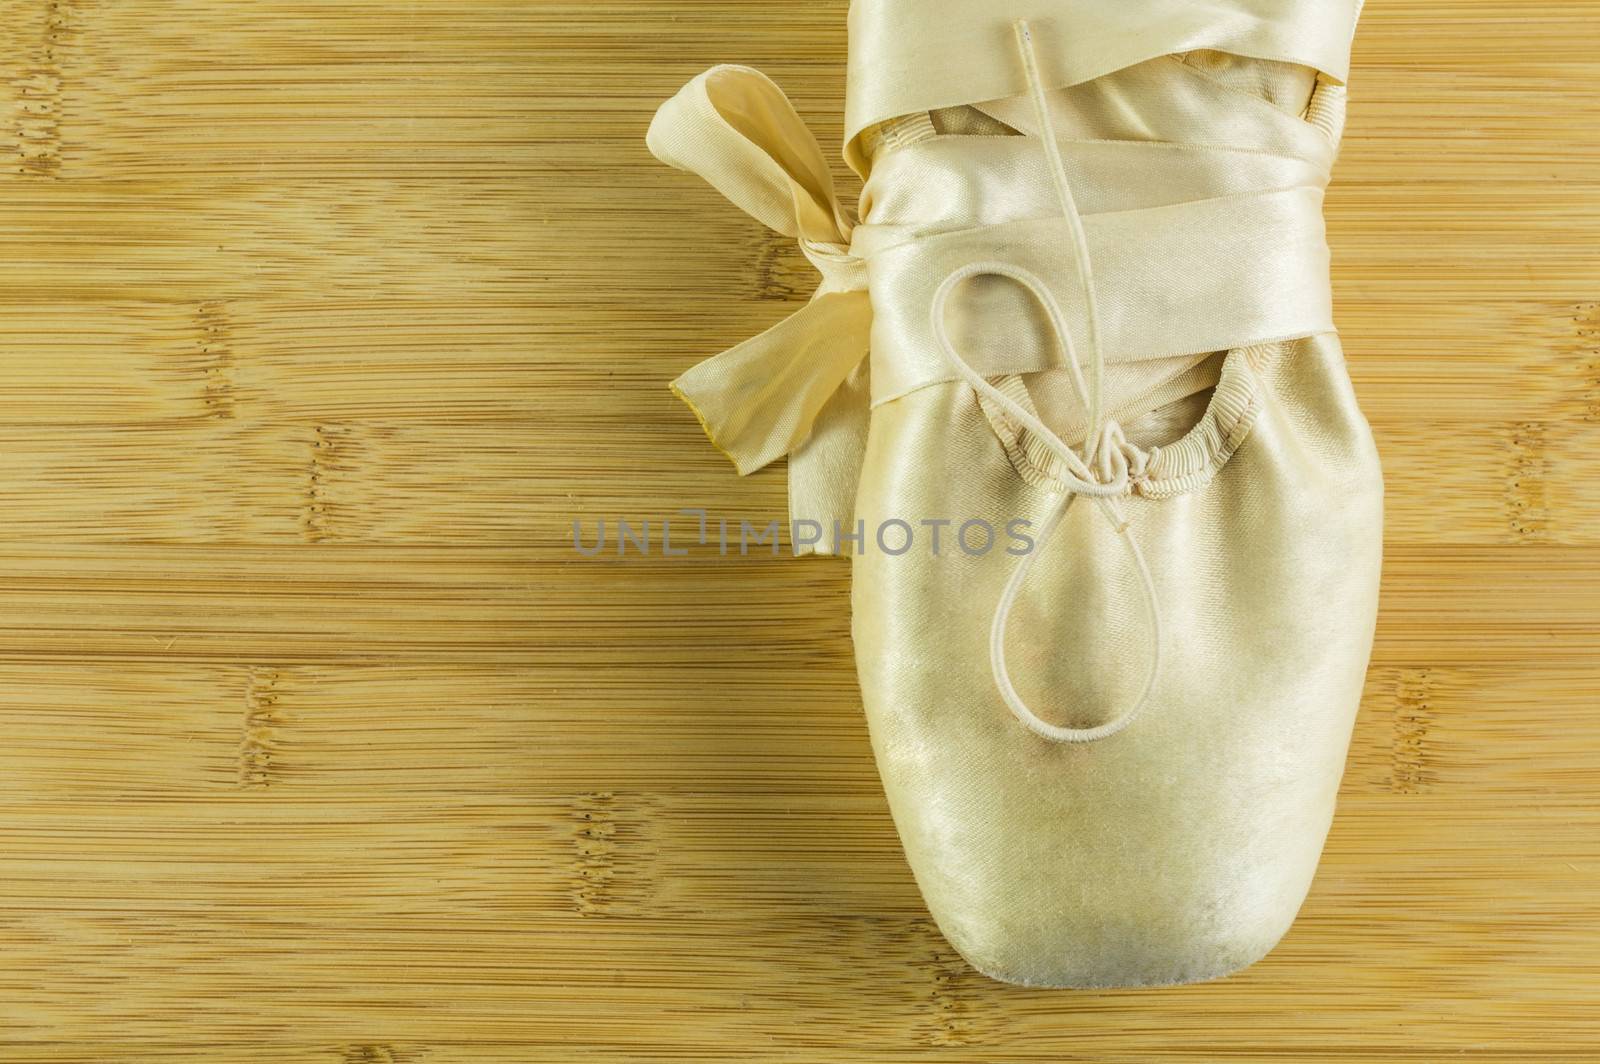 Ballet shoes on wooden flor by alexandrum01